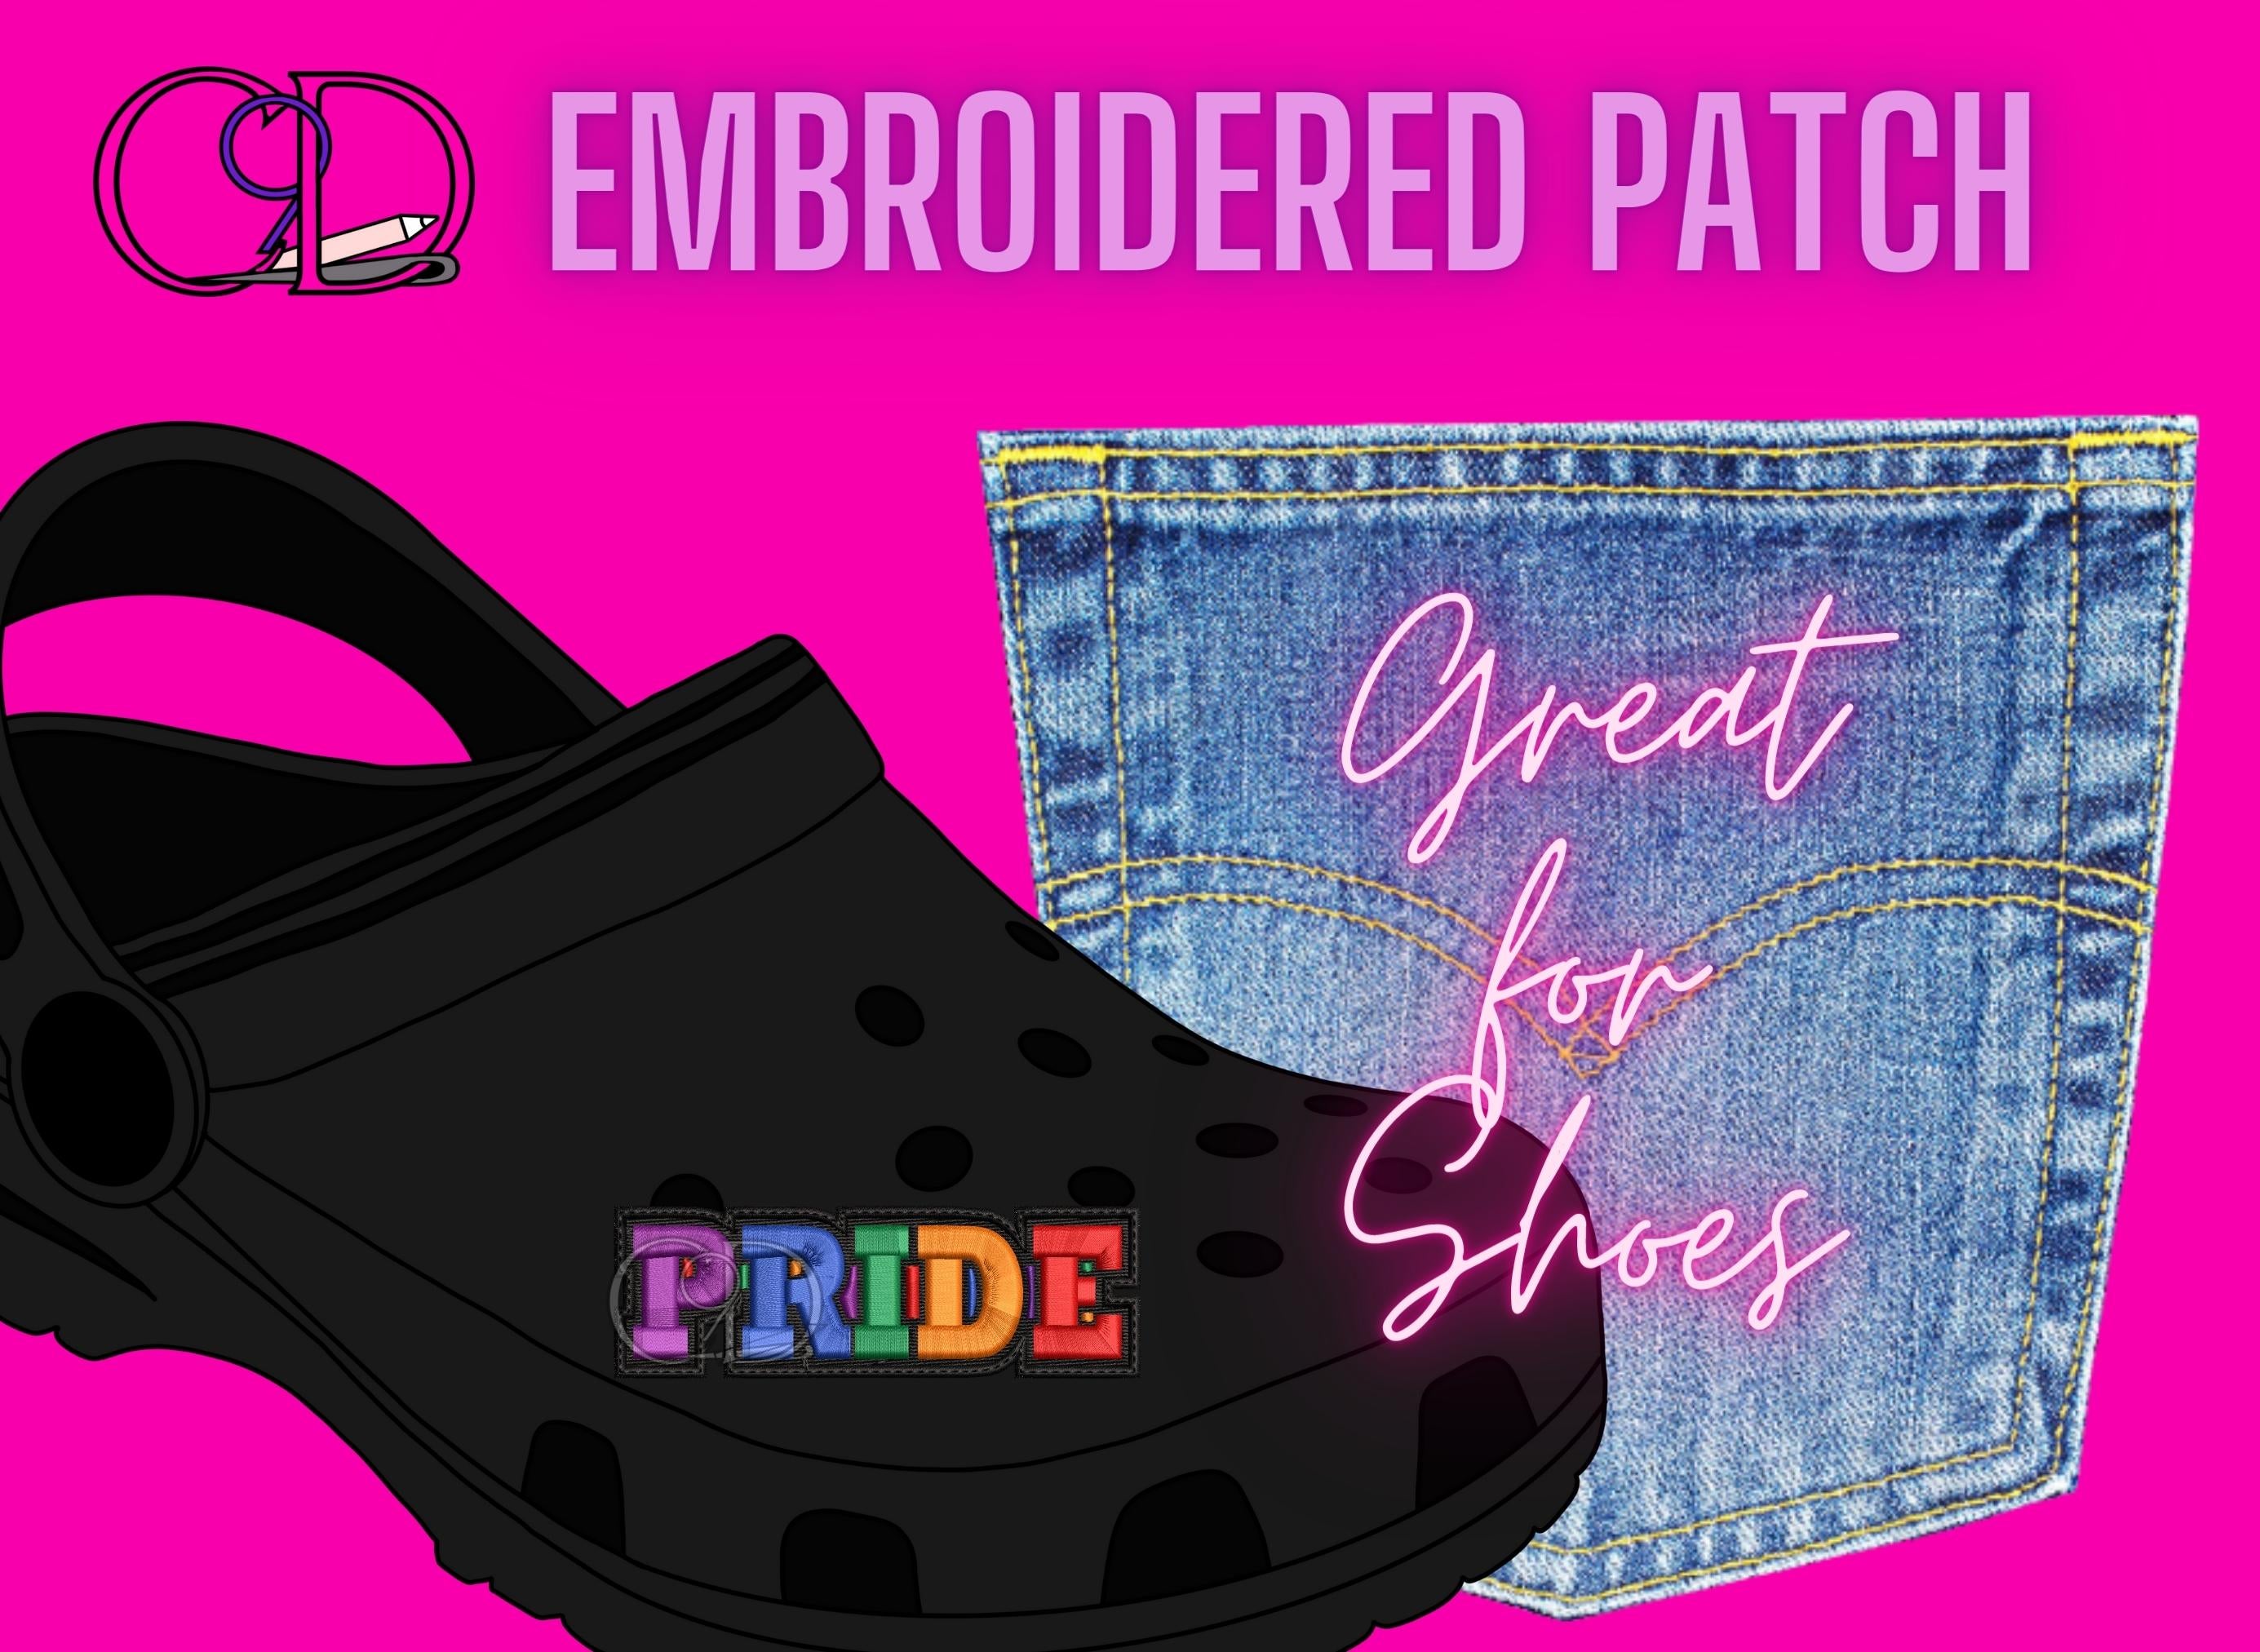 Adhere the pride patch to shoes. It makes a great decorative addition to thematic items.